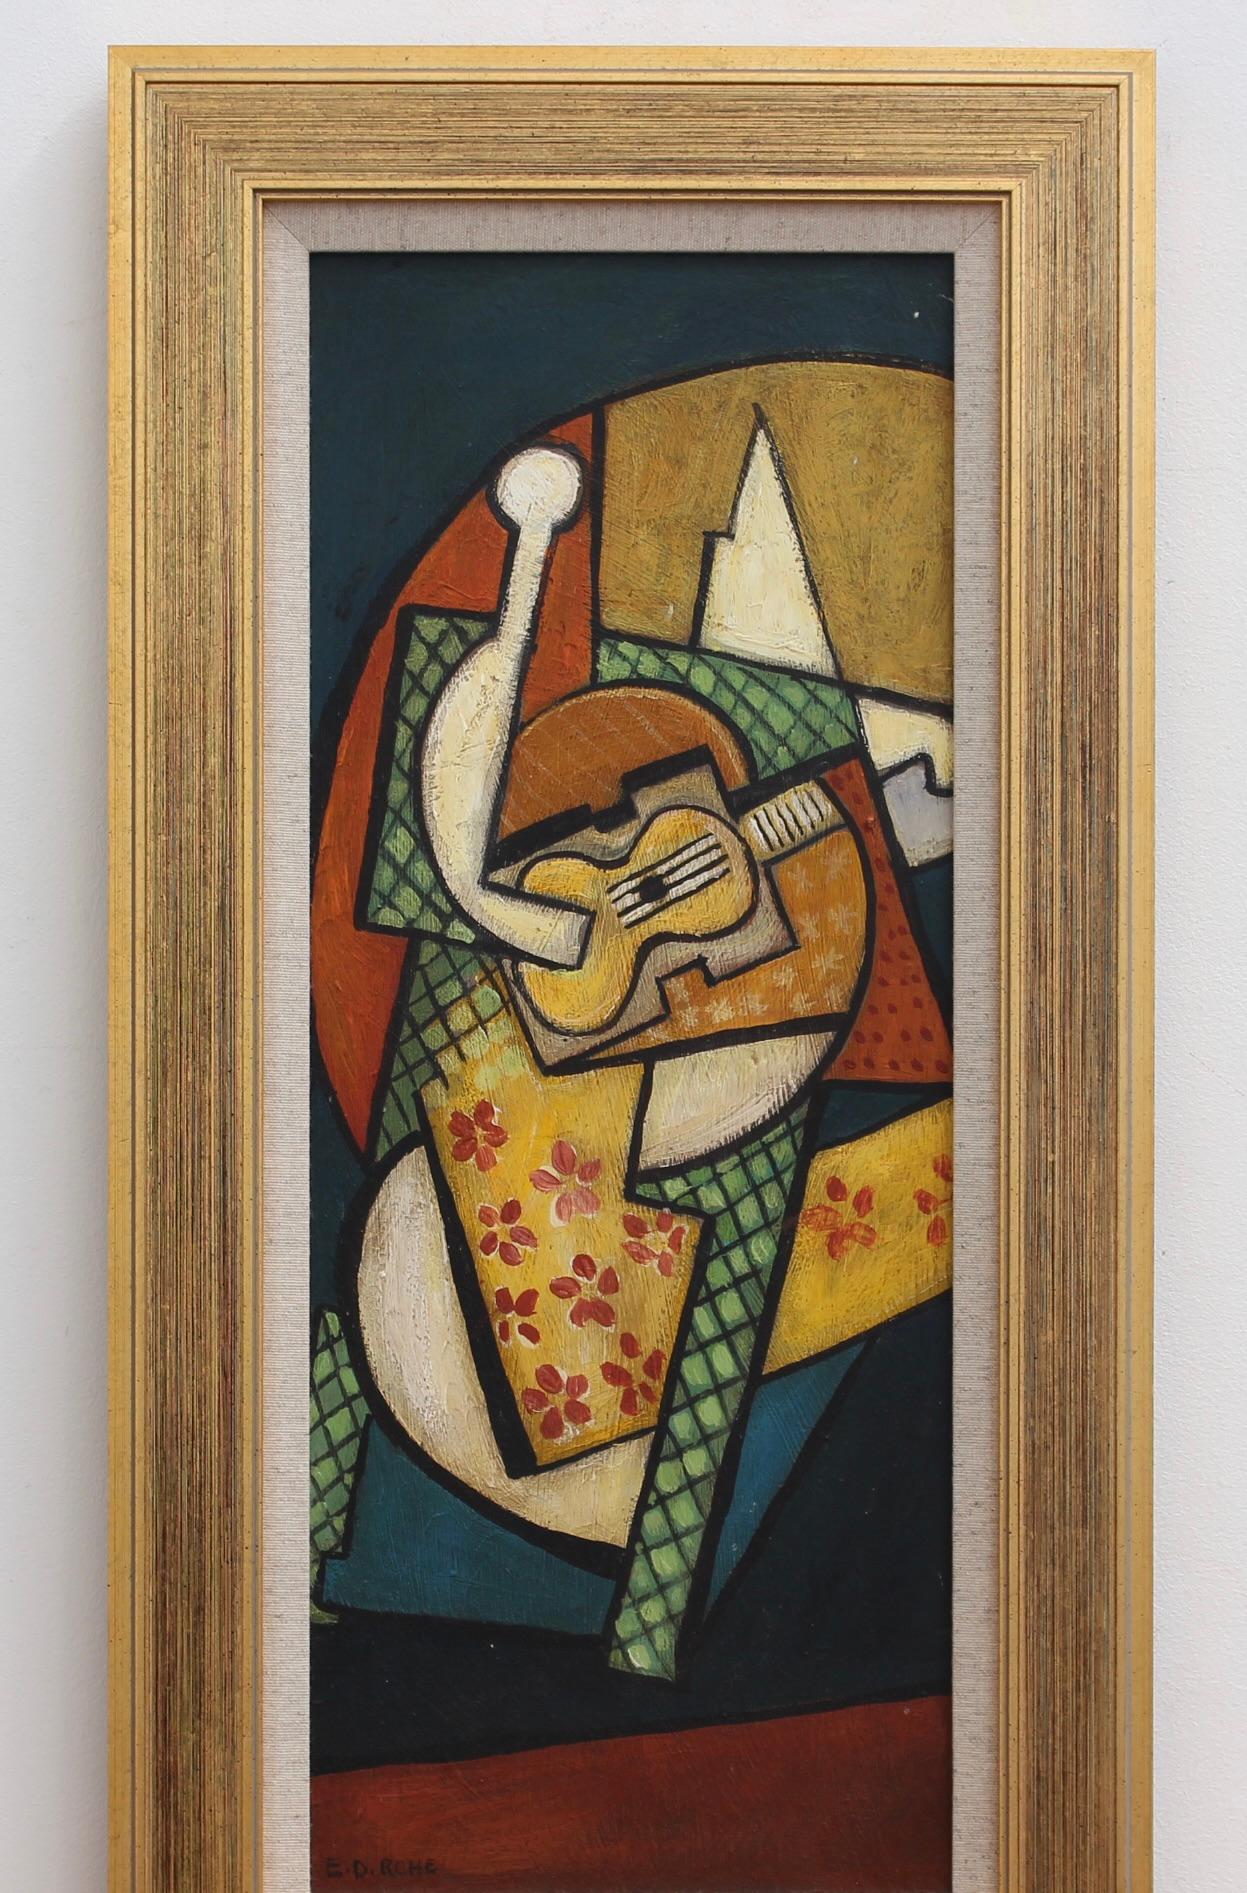 'Portrait of a Man Playing Guitar', Berlin School (circa 1960s) - Painting by Unknown